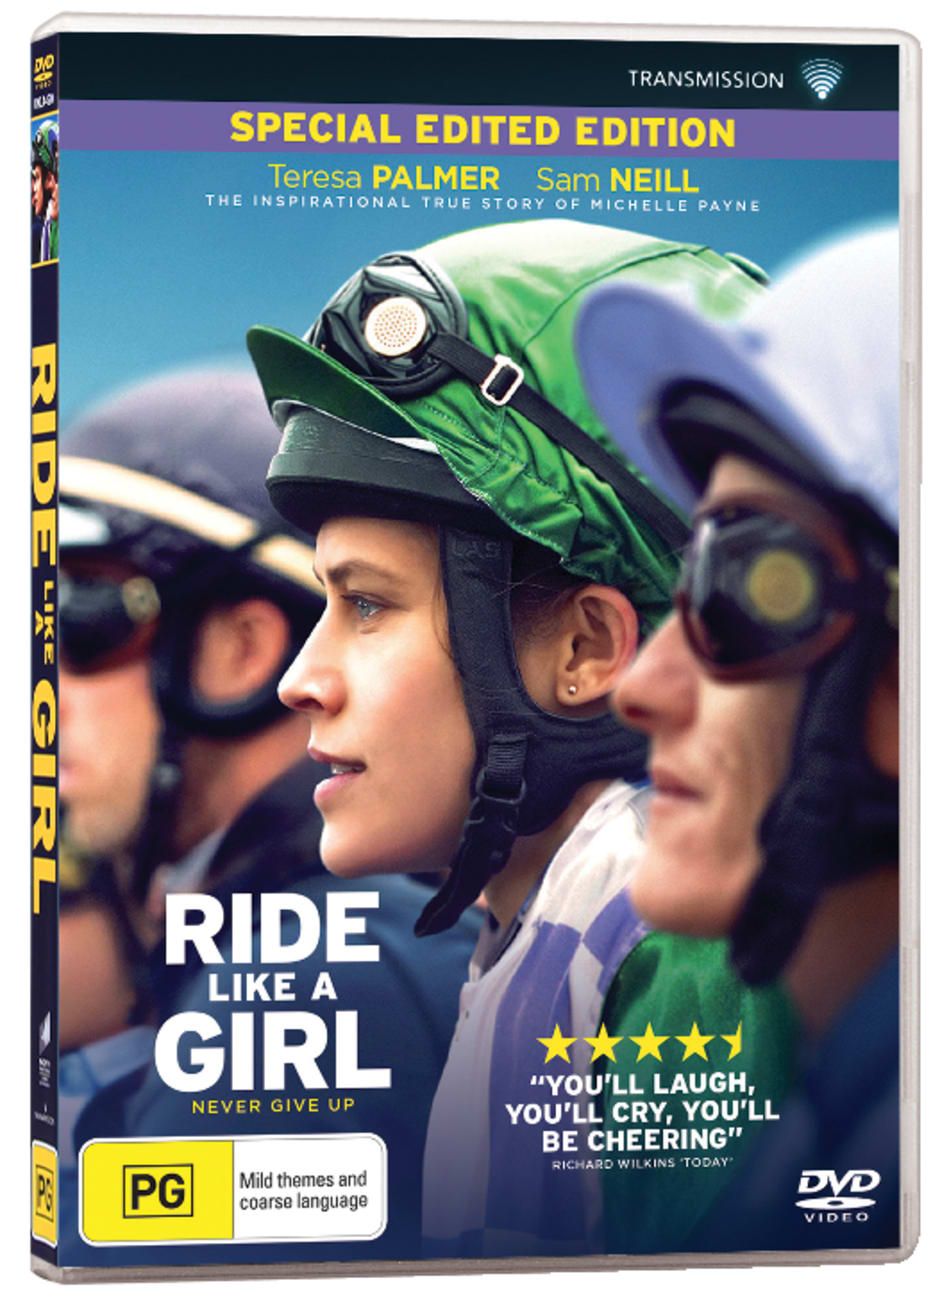 Ride Like a Girl (Special Edited Edition) DVD